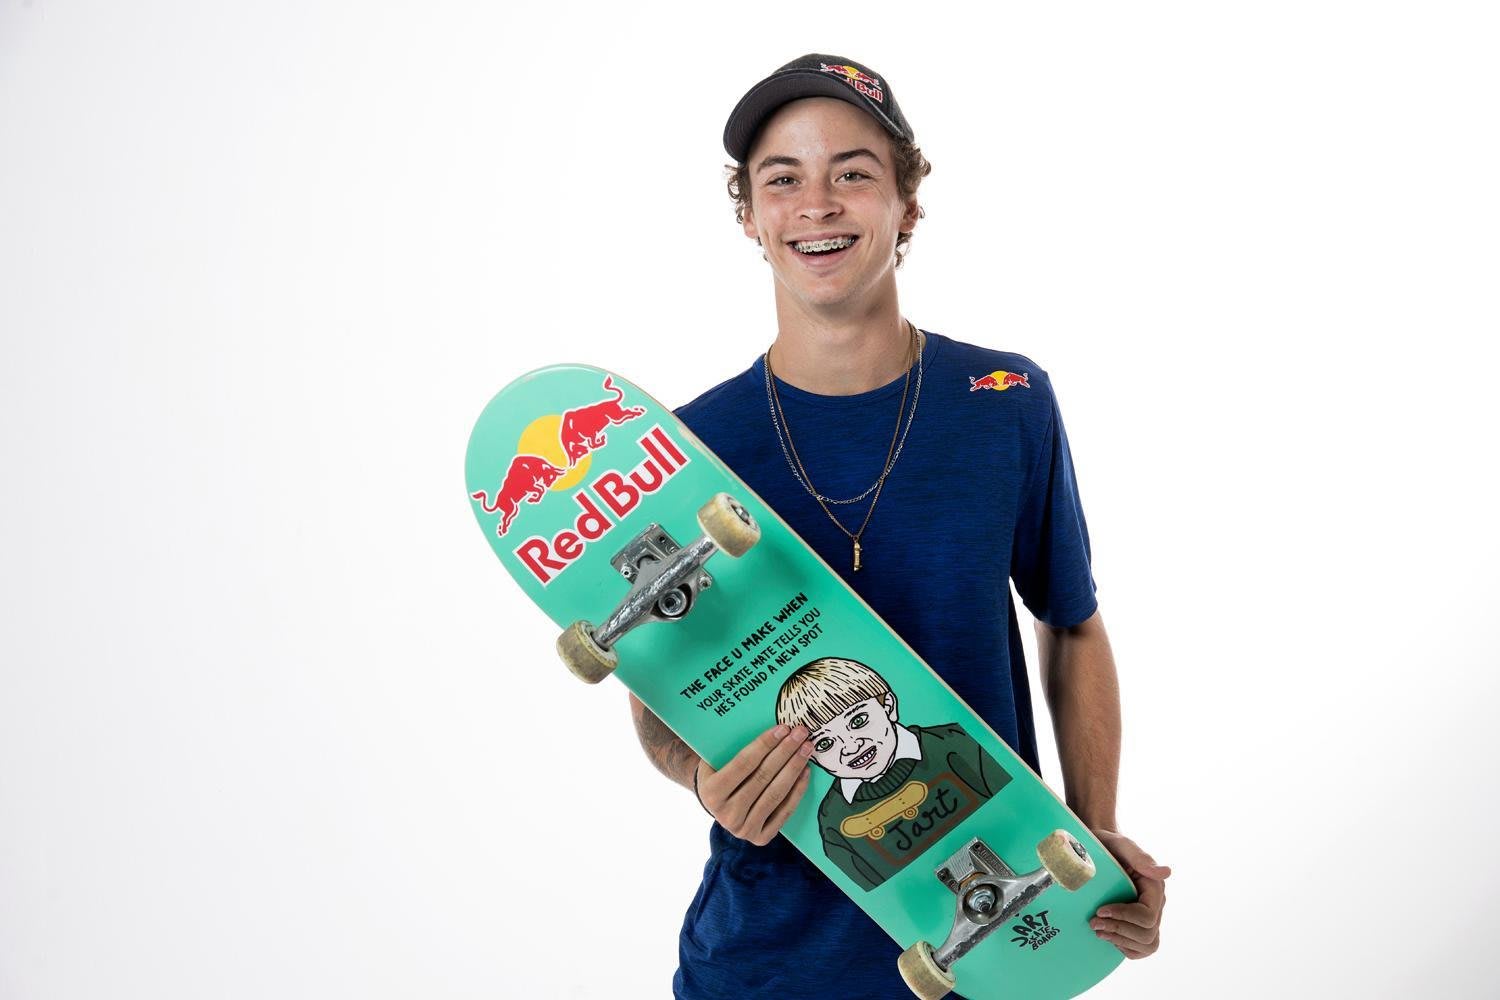 Udtale fup defile Gustavo Ribeiro: Skateboarding – Red Bull Athlete Page